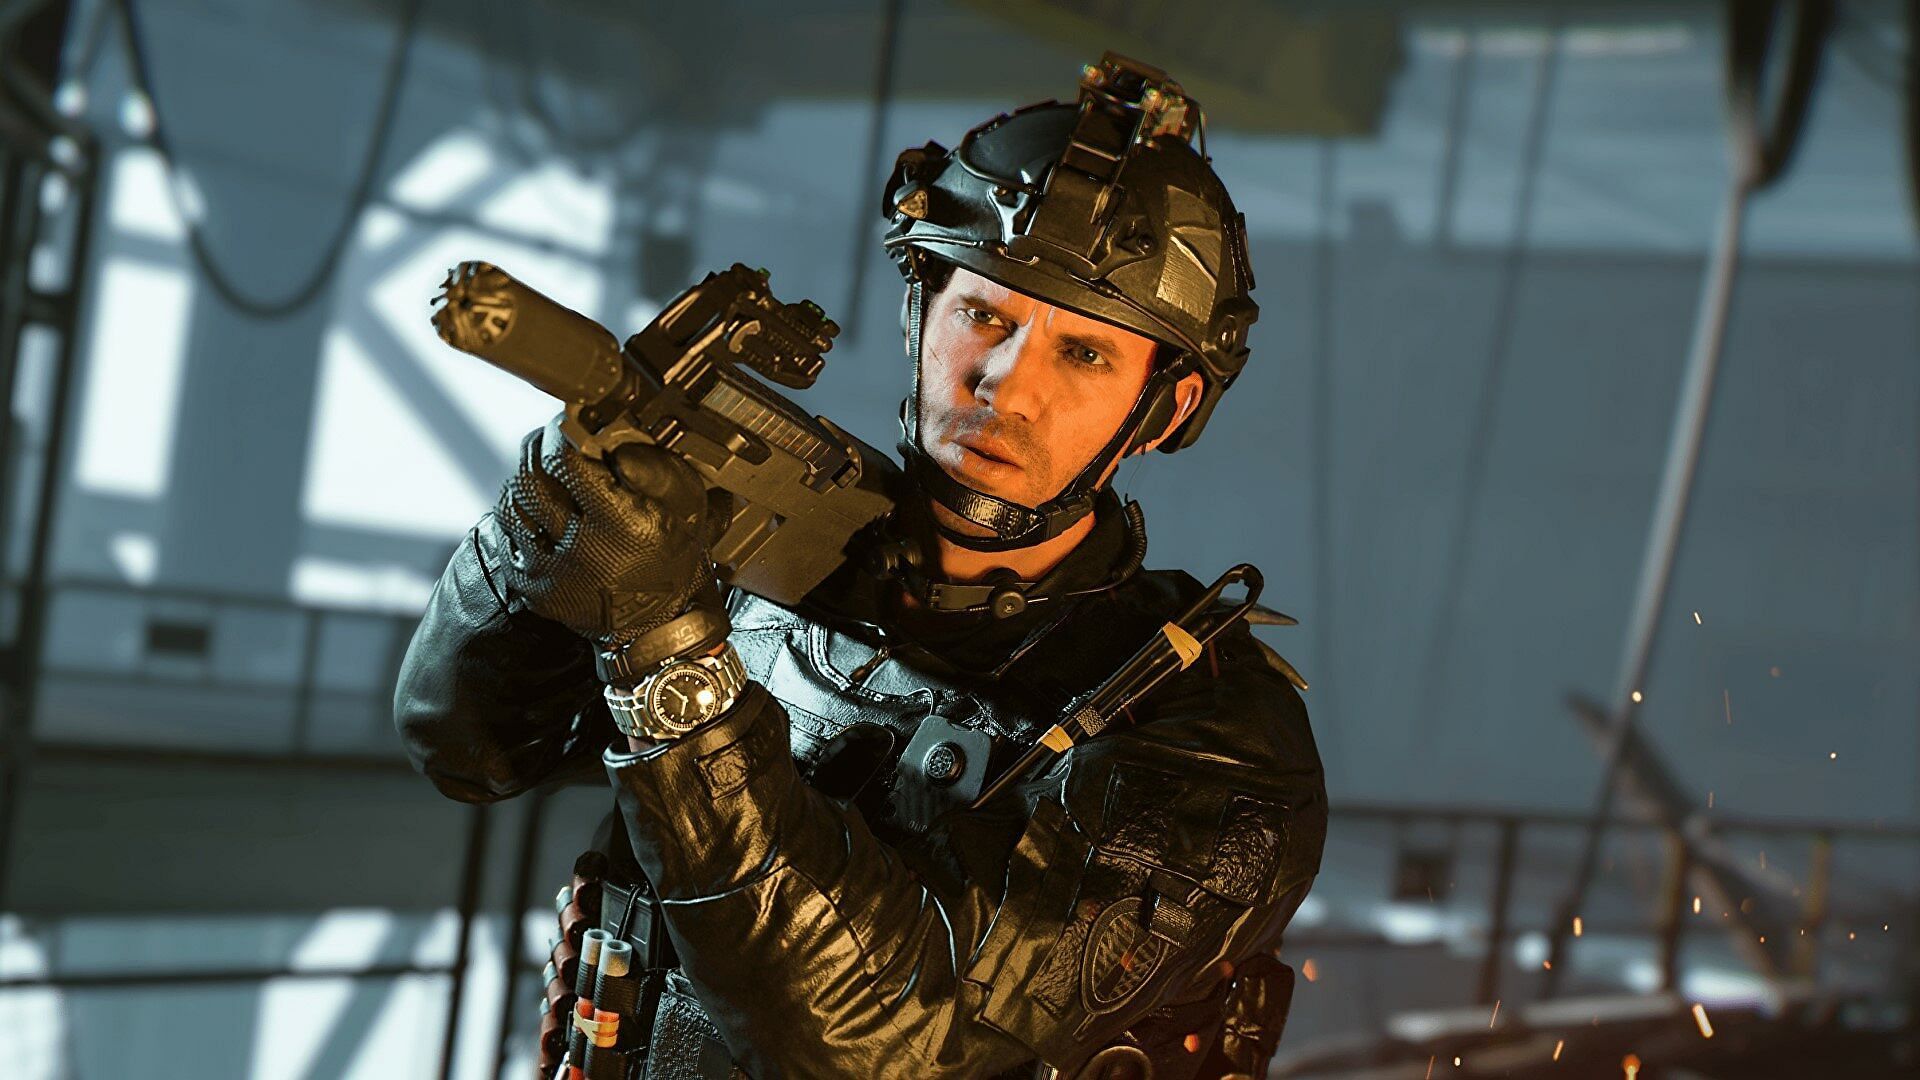 The PDSW 528 is hitting quite hard in Warzone 2 Season 2 (Image via Activision)